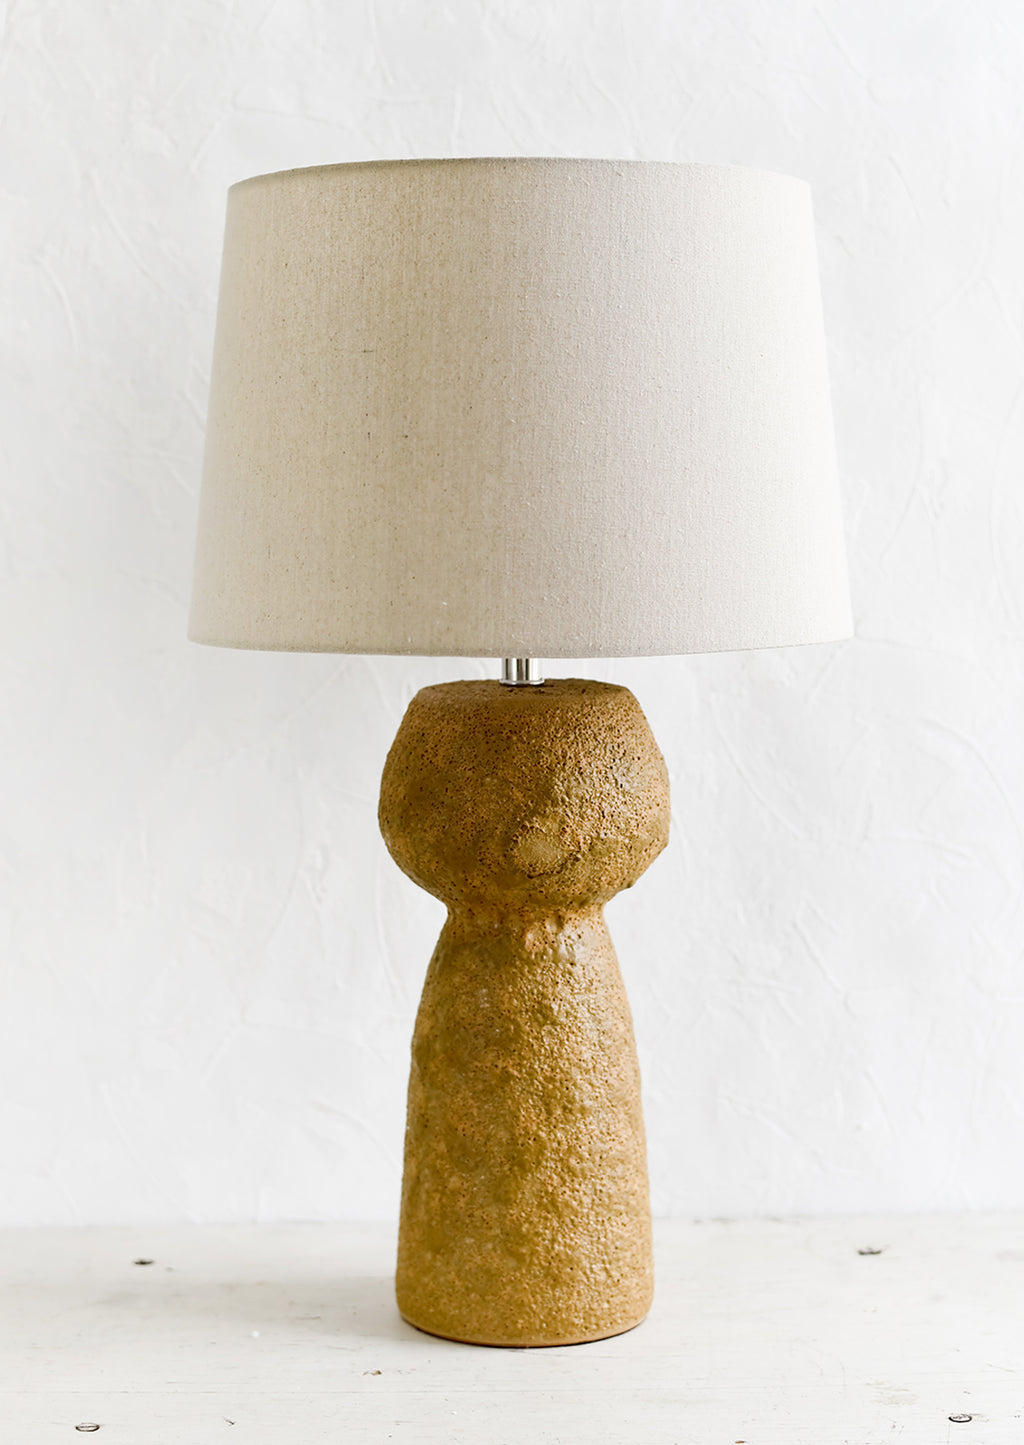 1: A textured brown stoneware table lamp.